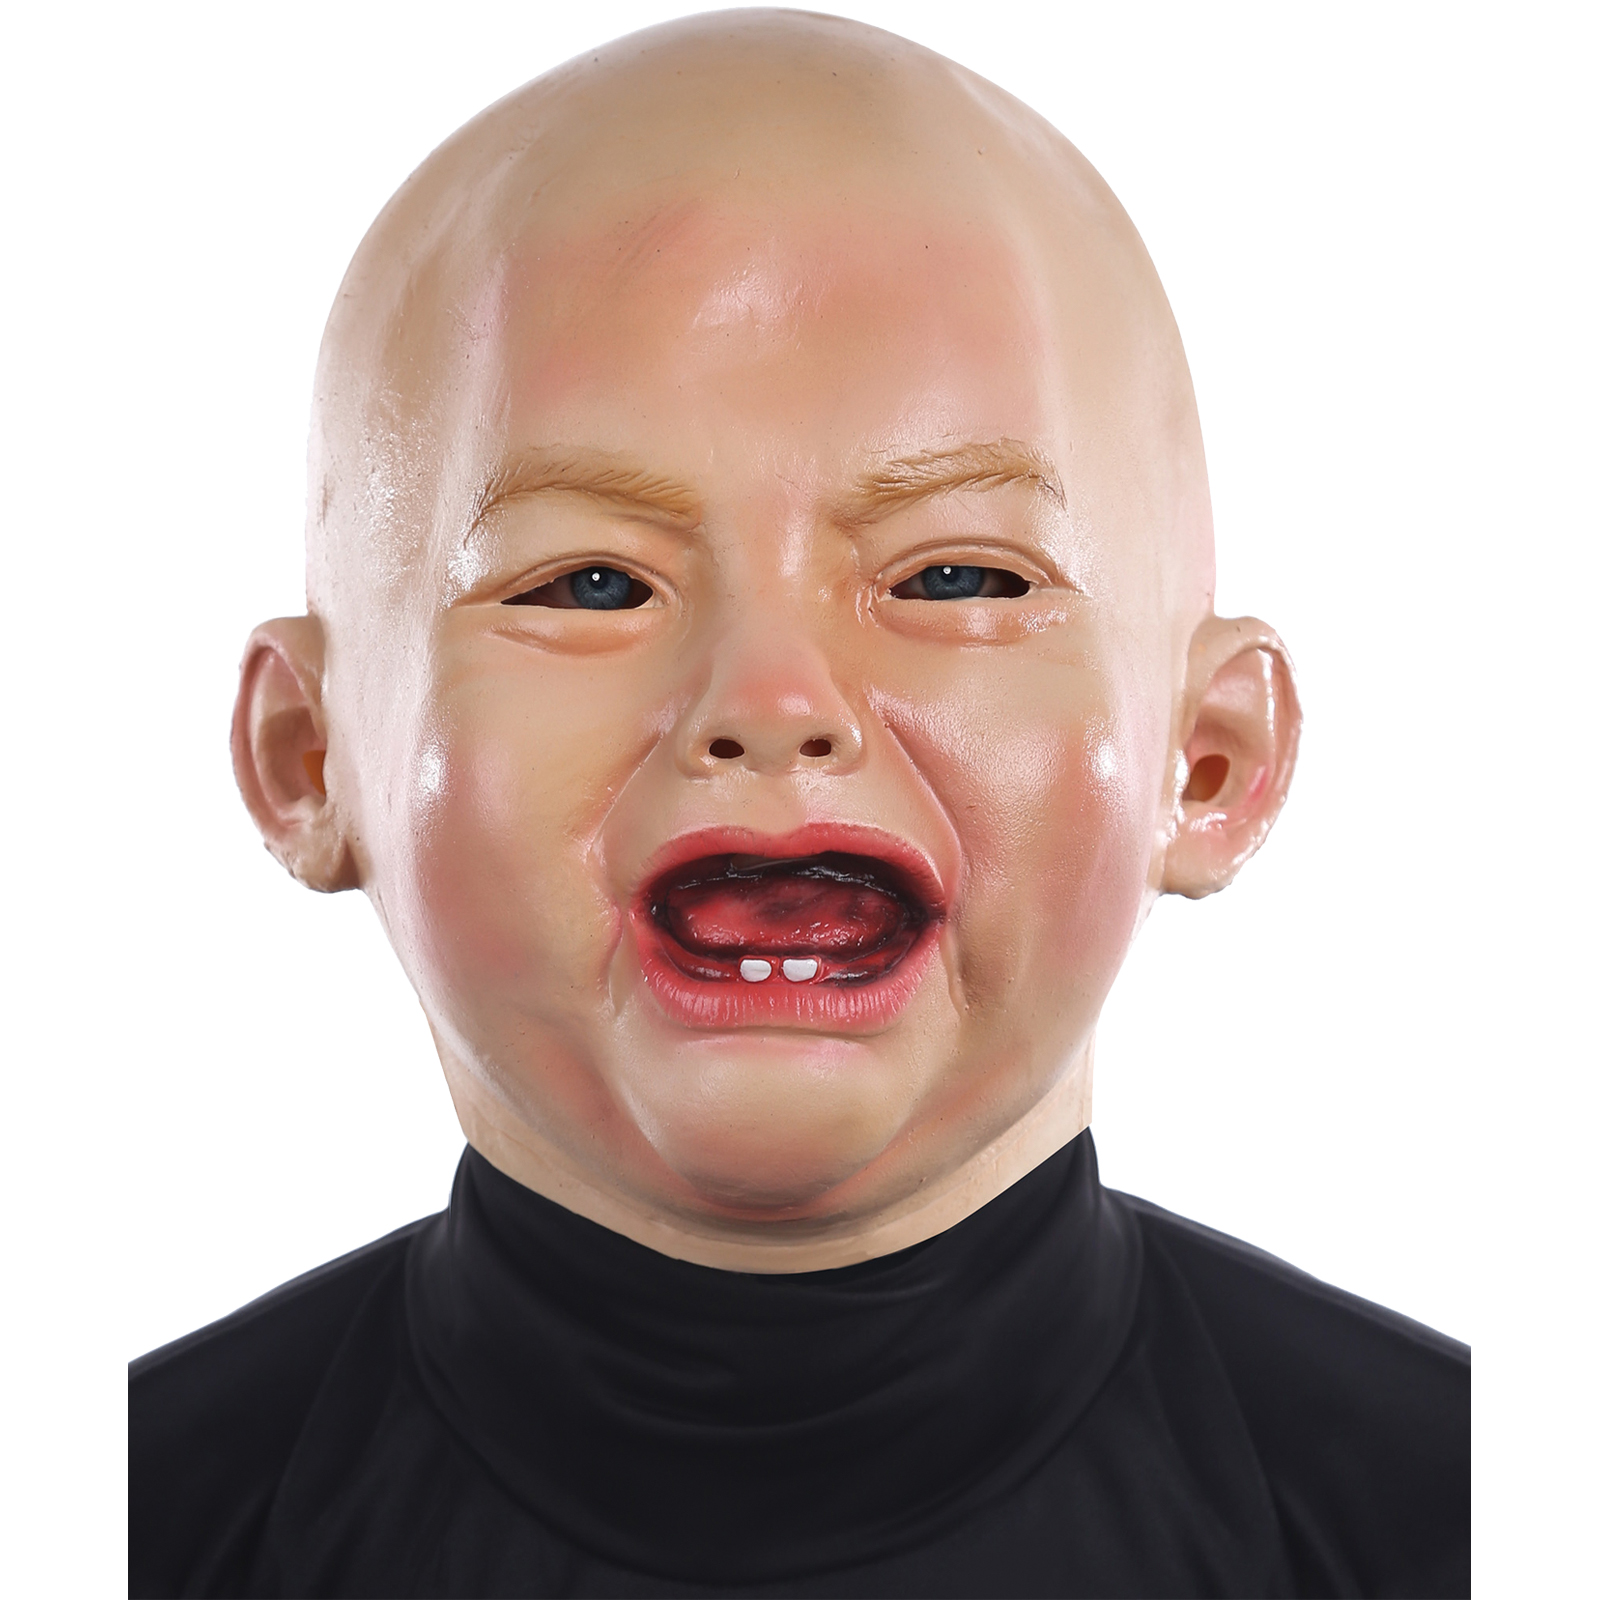 Crying Baby Mask Costume Accessory